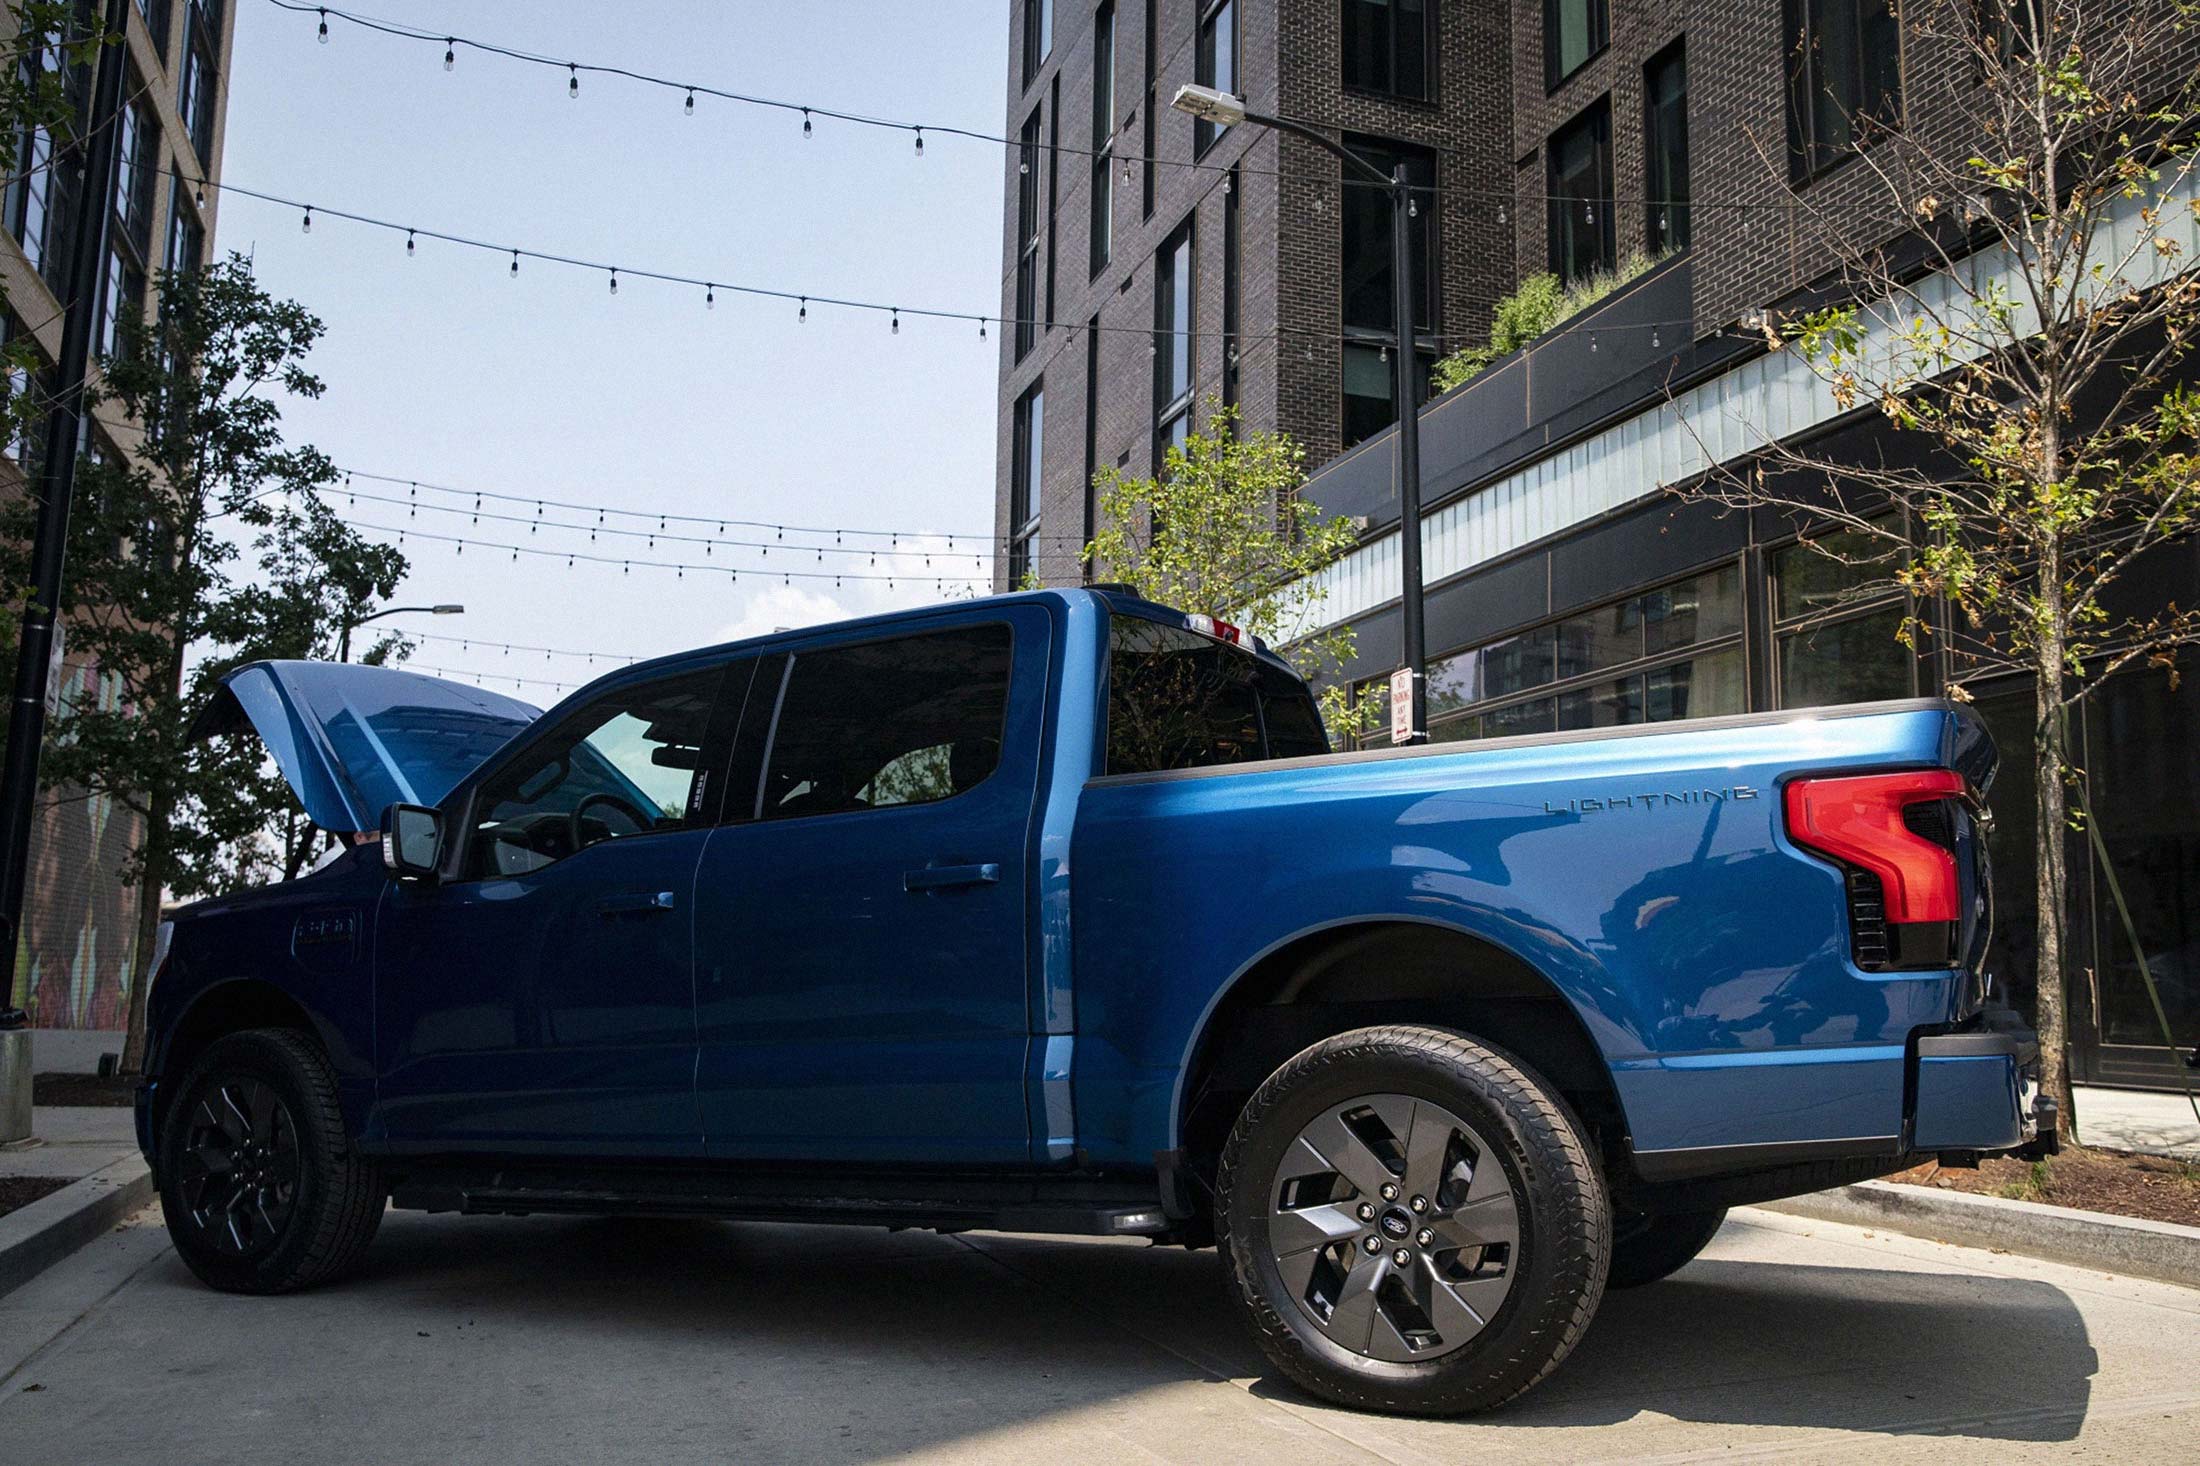 How Ford's Electric F-150 Pickup Truck Will Cut Carbon Pollution